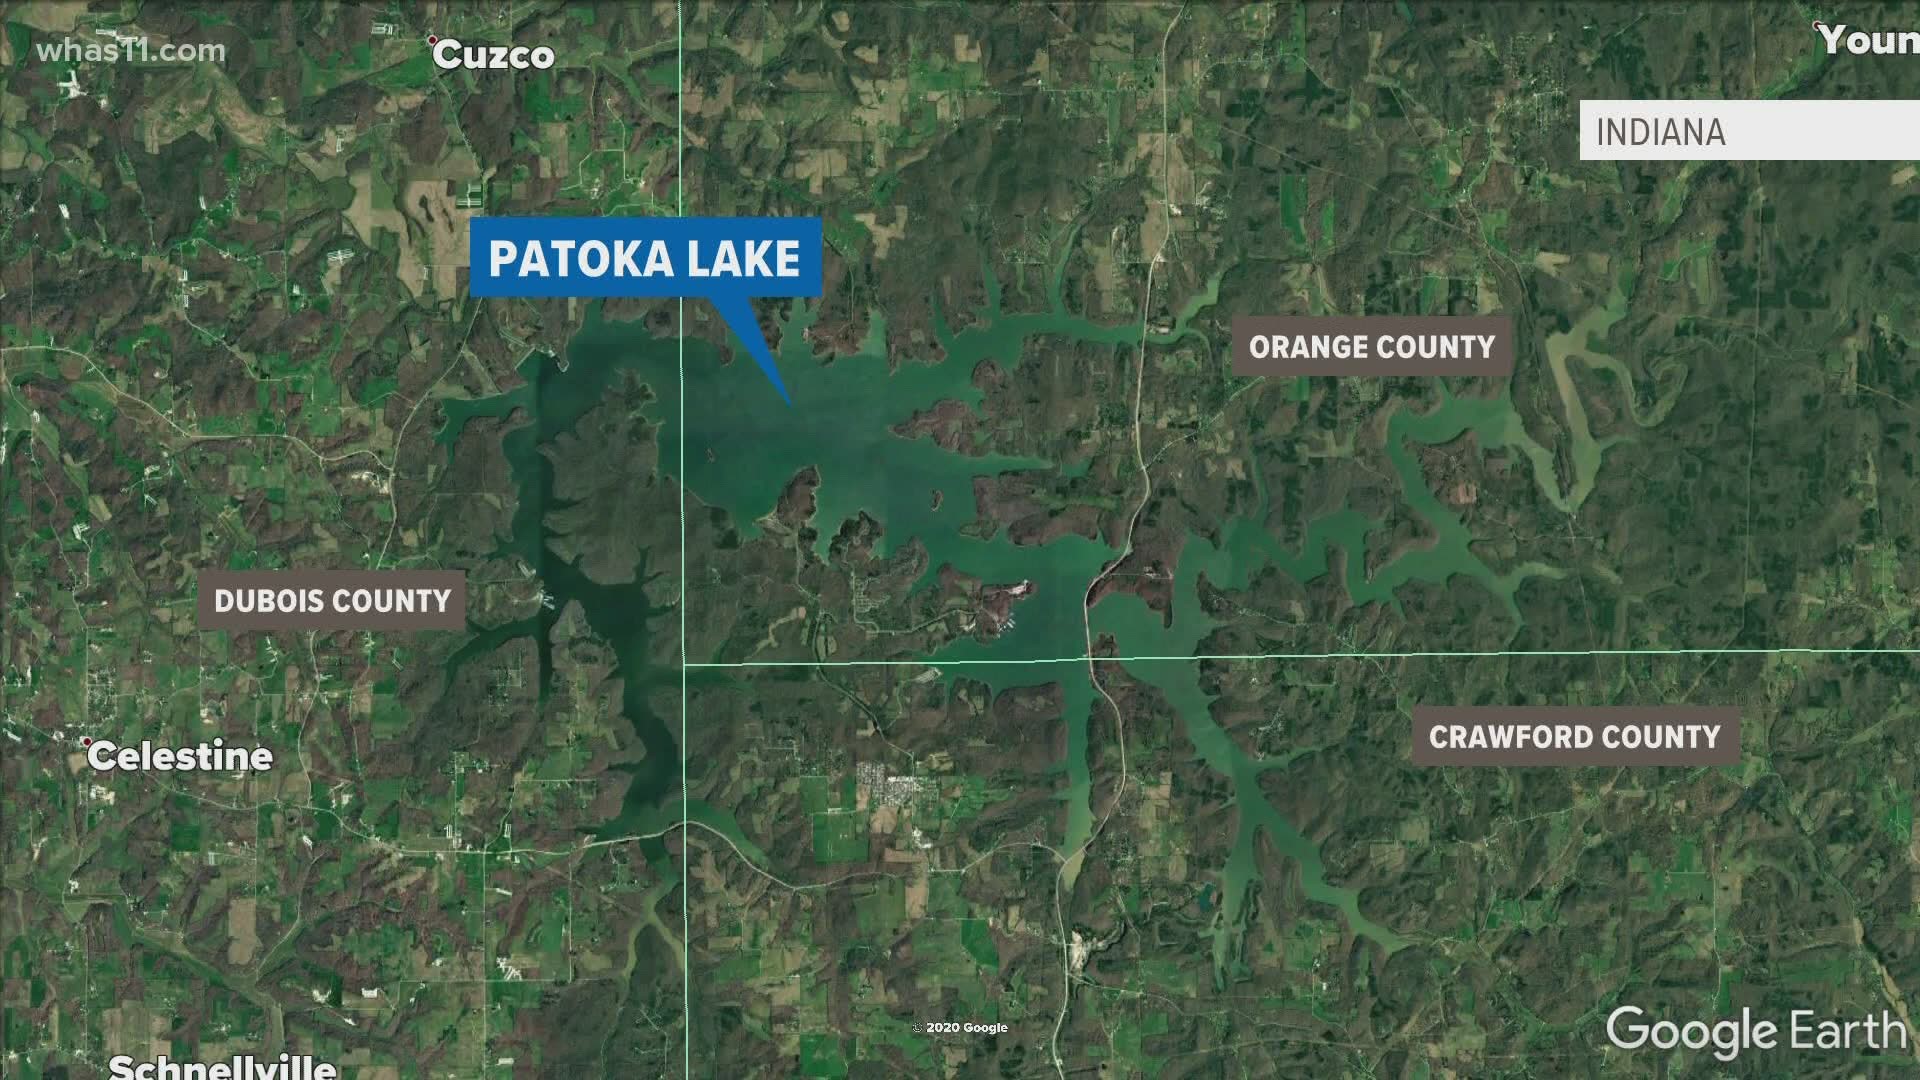 Police are investigating after a 33-year-old man died while trying to save two women in distress while in the water at Patoka Lake on Sunday.